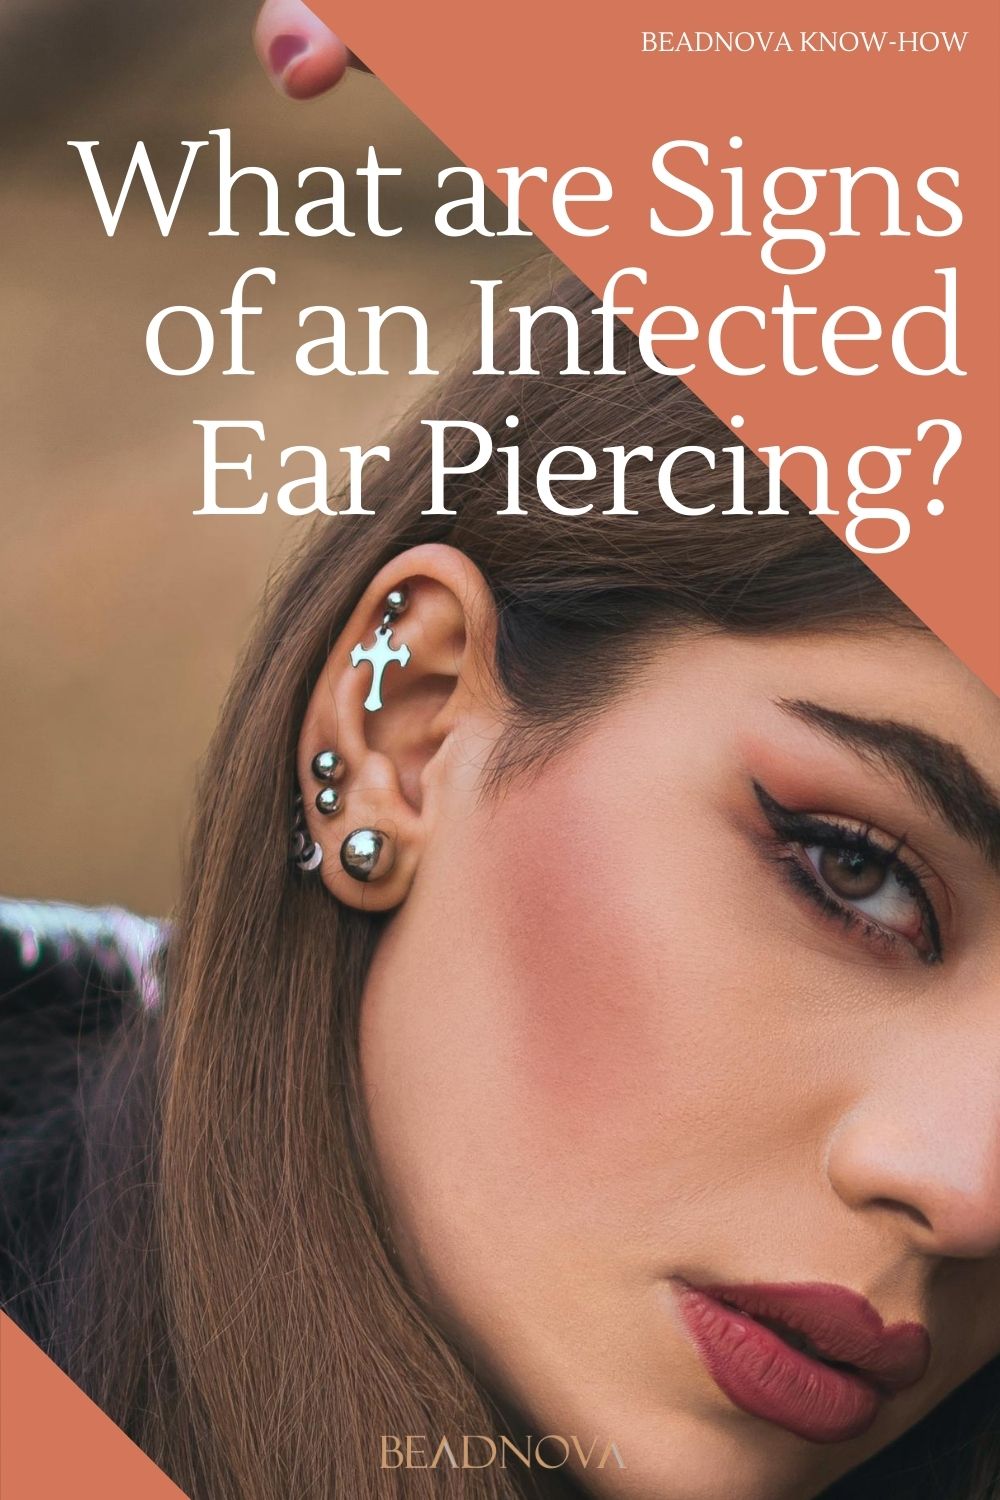 How to Treat an Infected Ear Piercing at Home? Beadnova